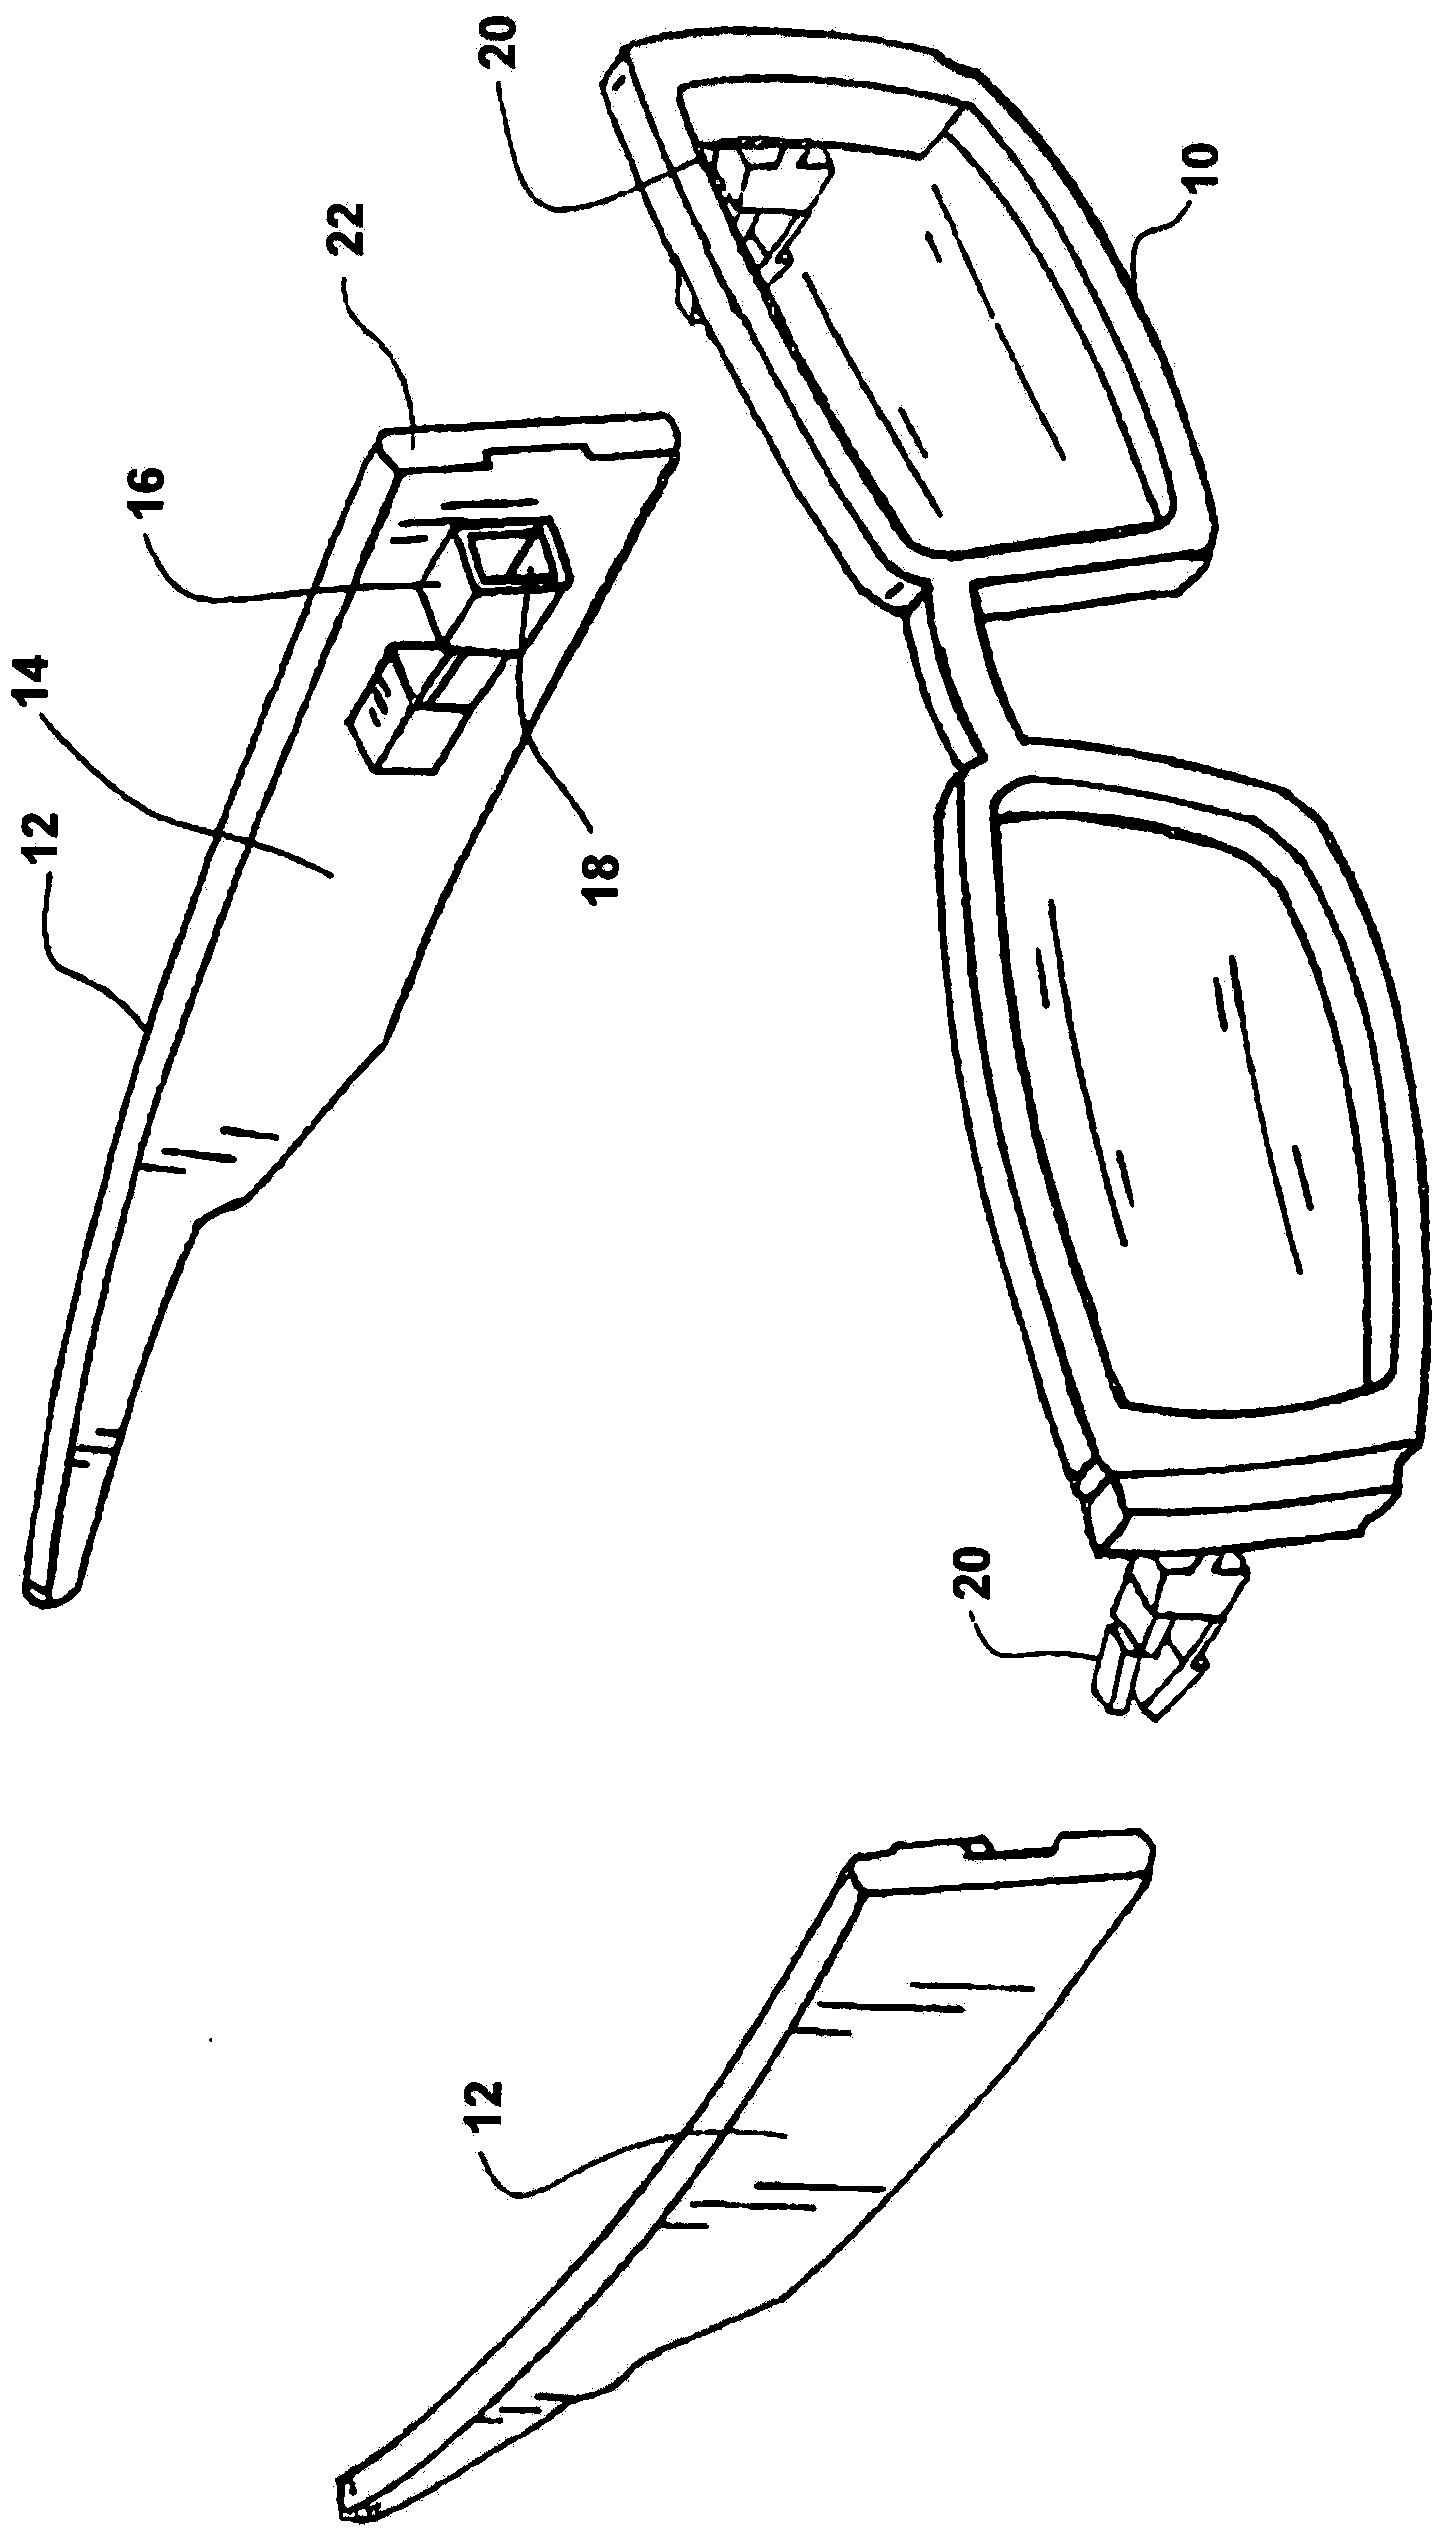 Side arm release system for eyeglass frame with changeable temple pieces